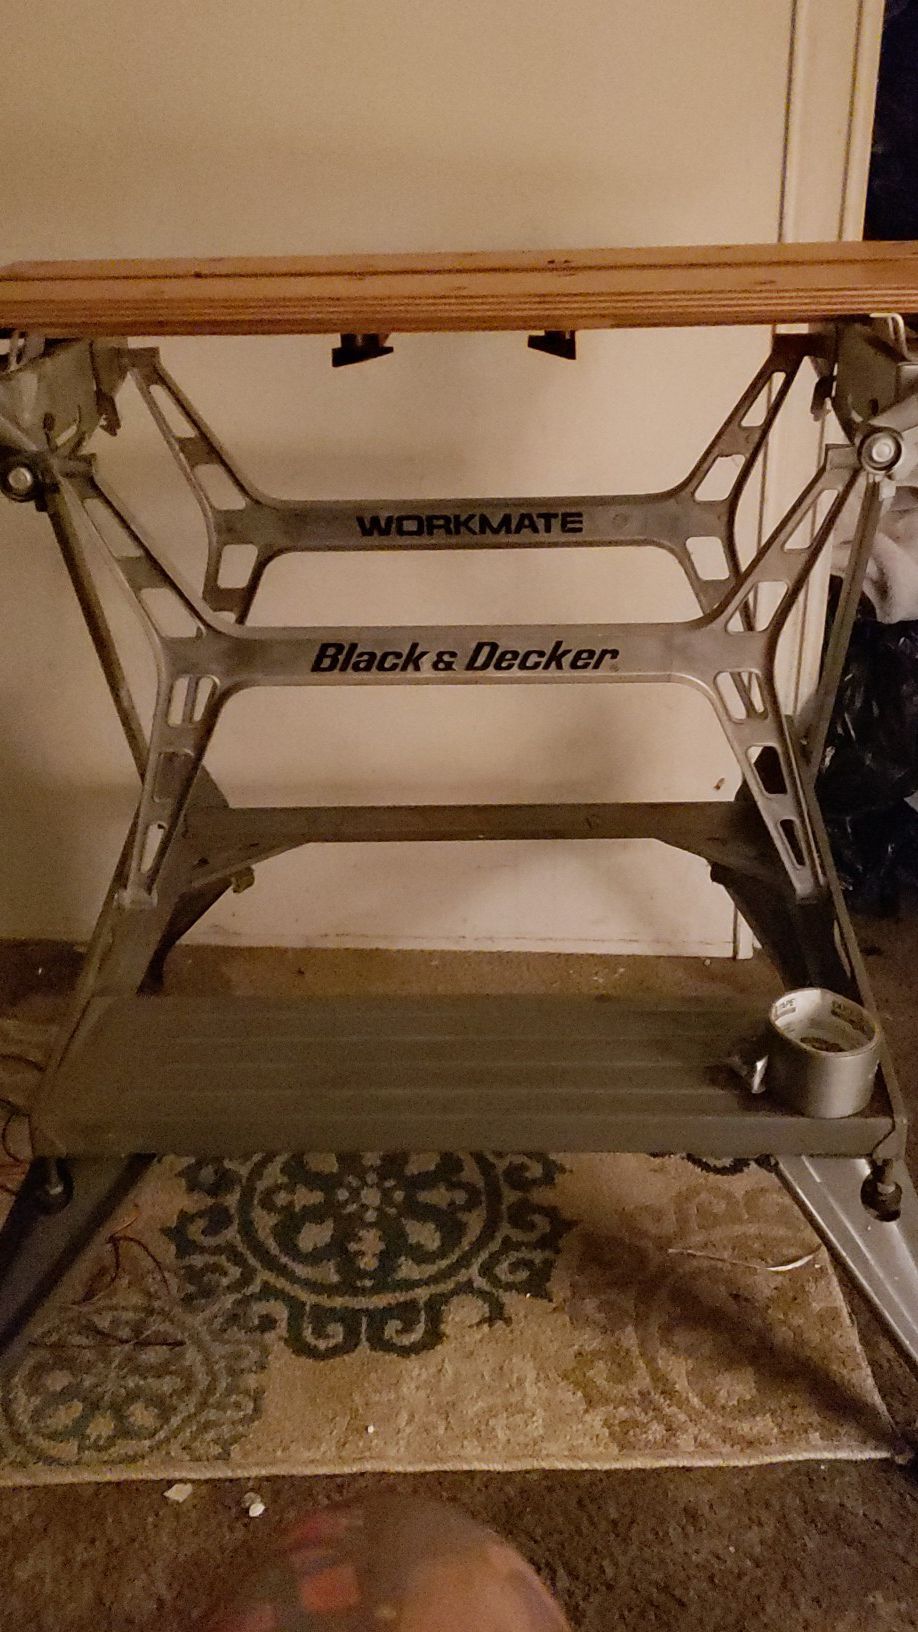 B&D Workmate 200 for Sale in Dallas, TX - OfferUp